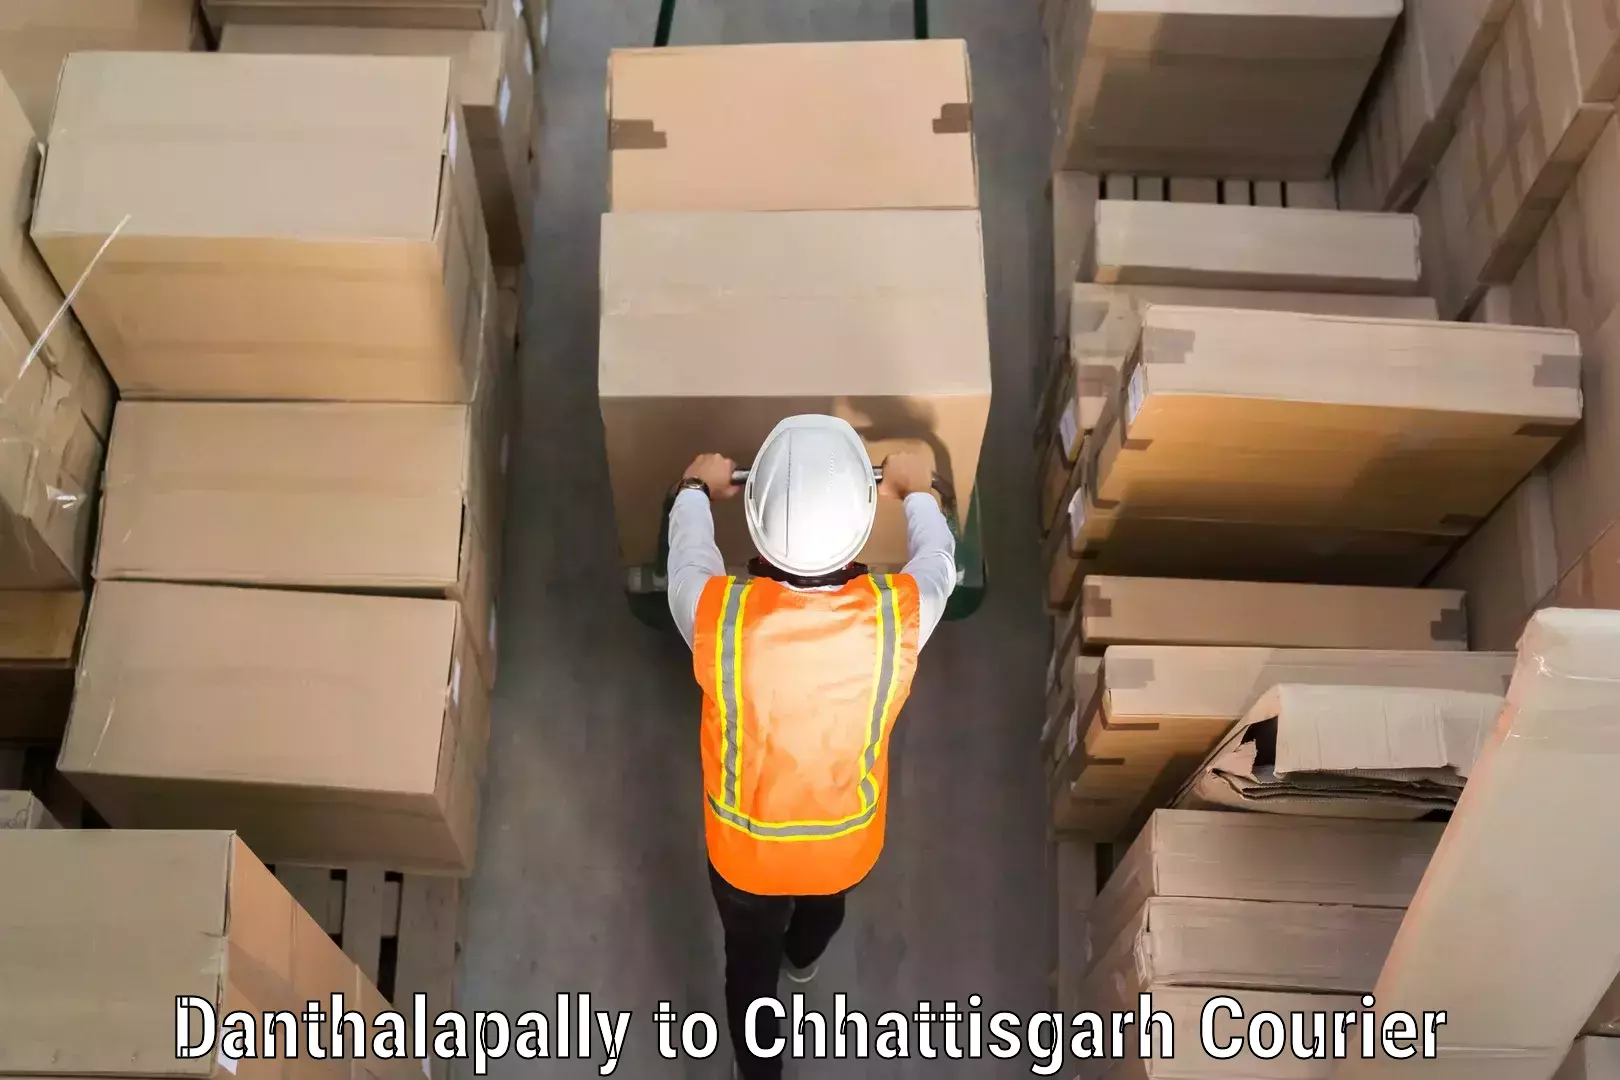 Luggage delivery providers Danthalapally to Chhattisgarh